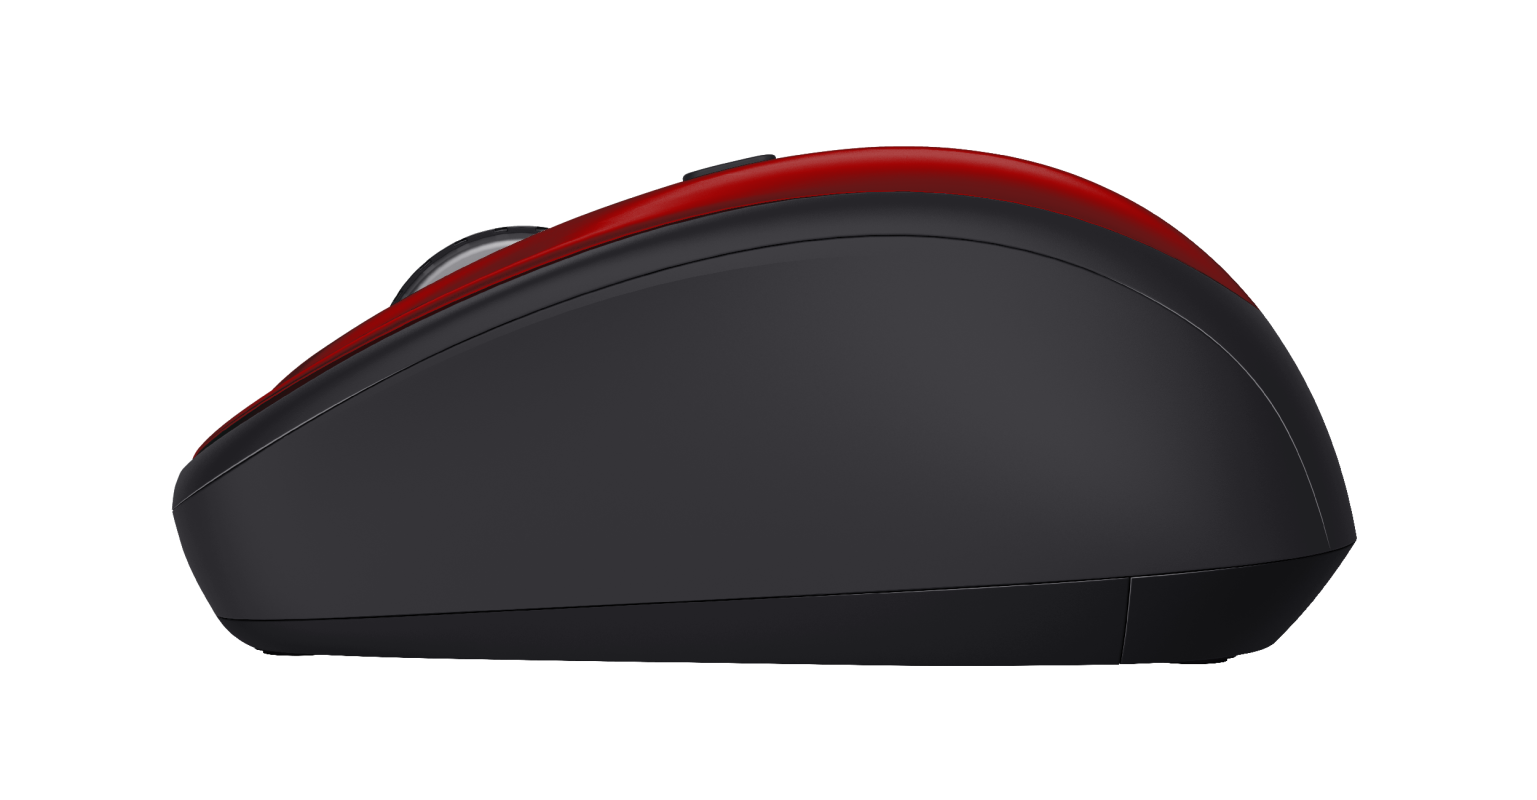 Yvi+ Silent Wireless Mouse Eco - red-Side